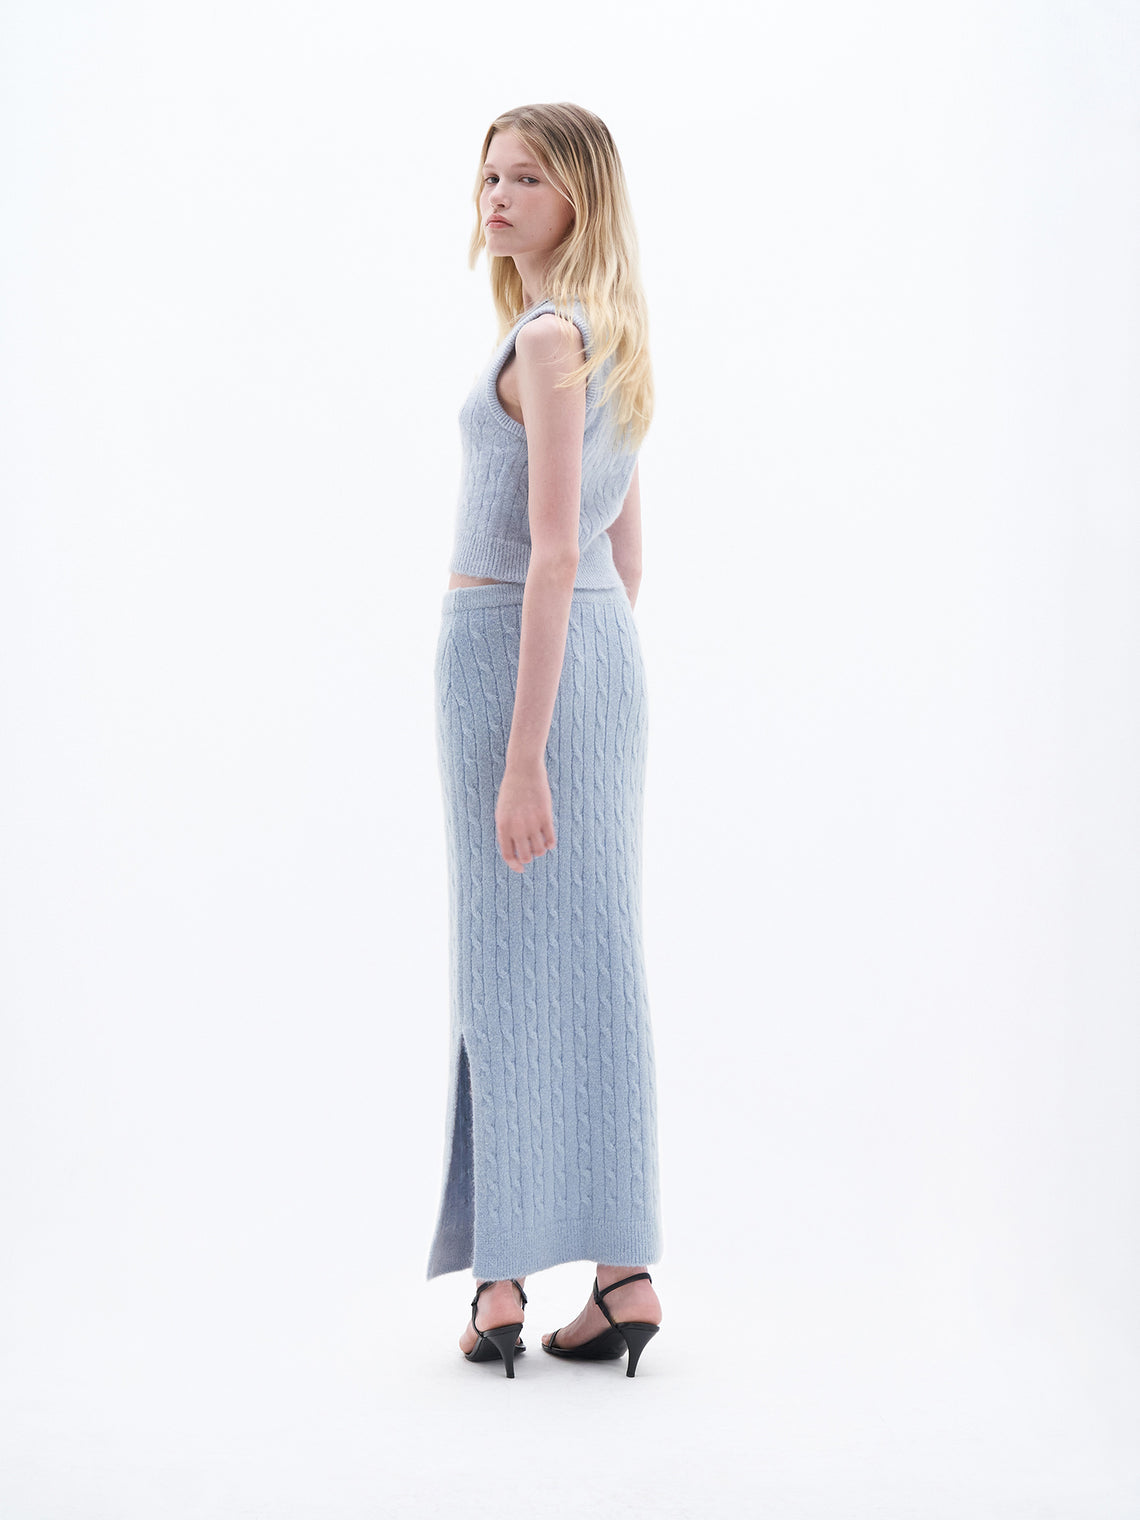 Braided mohair knit skirt by Filippa K in ice blue